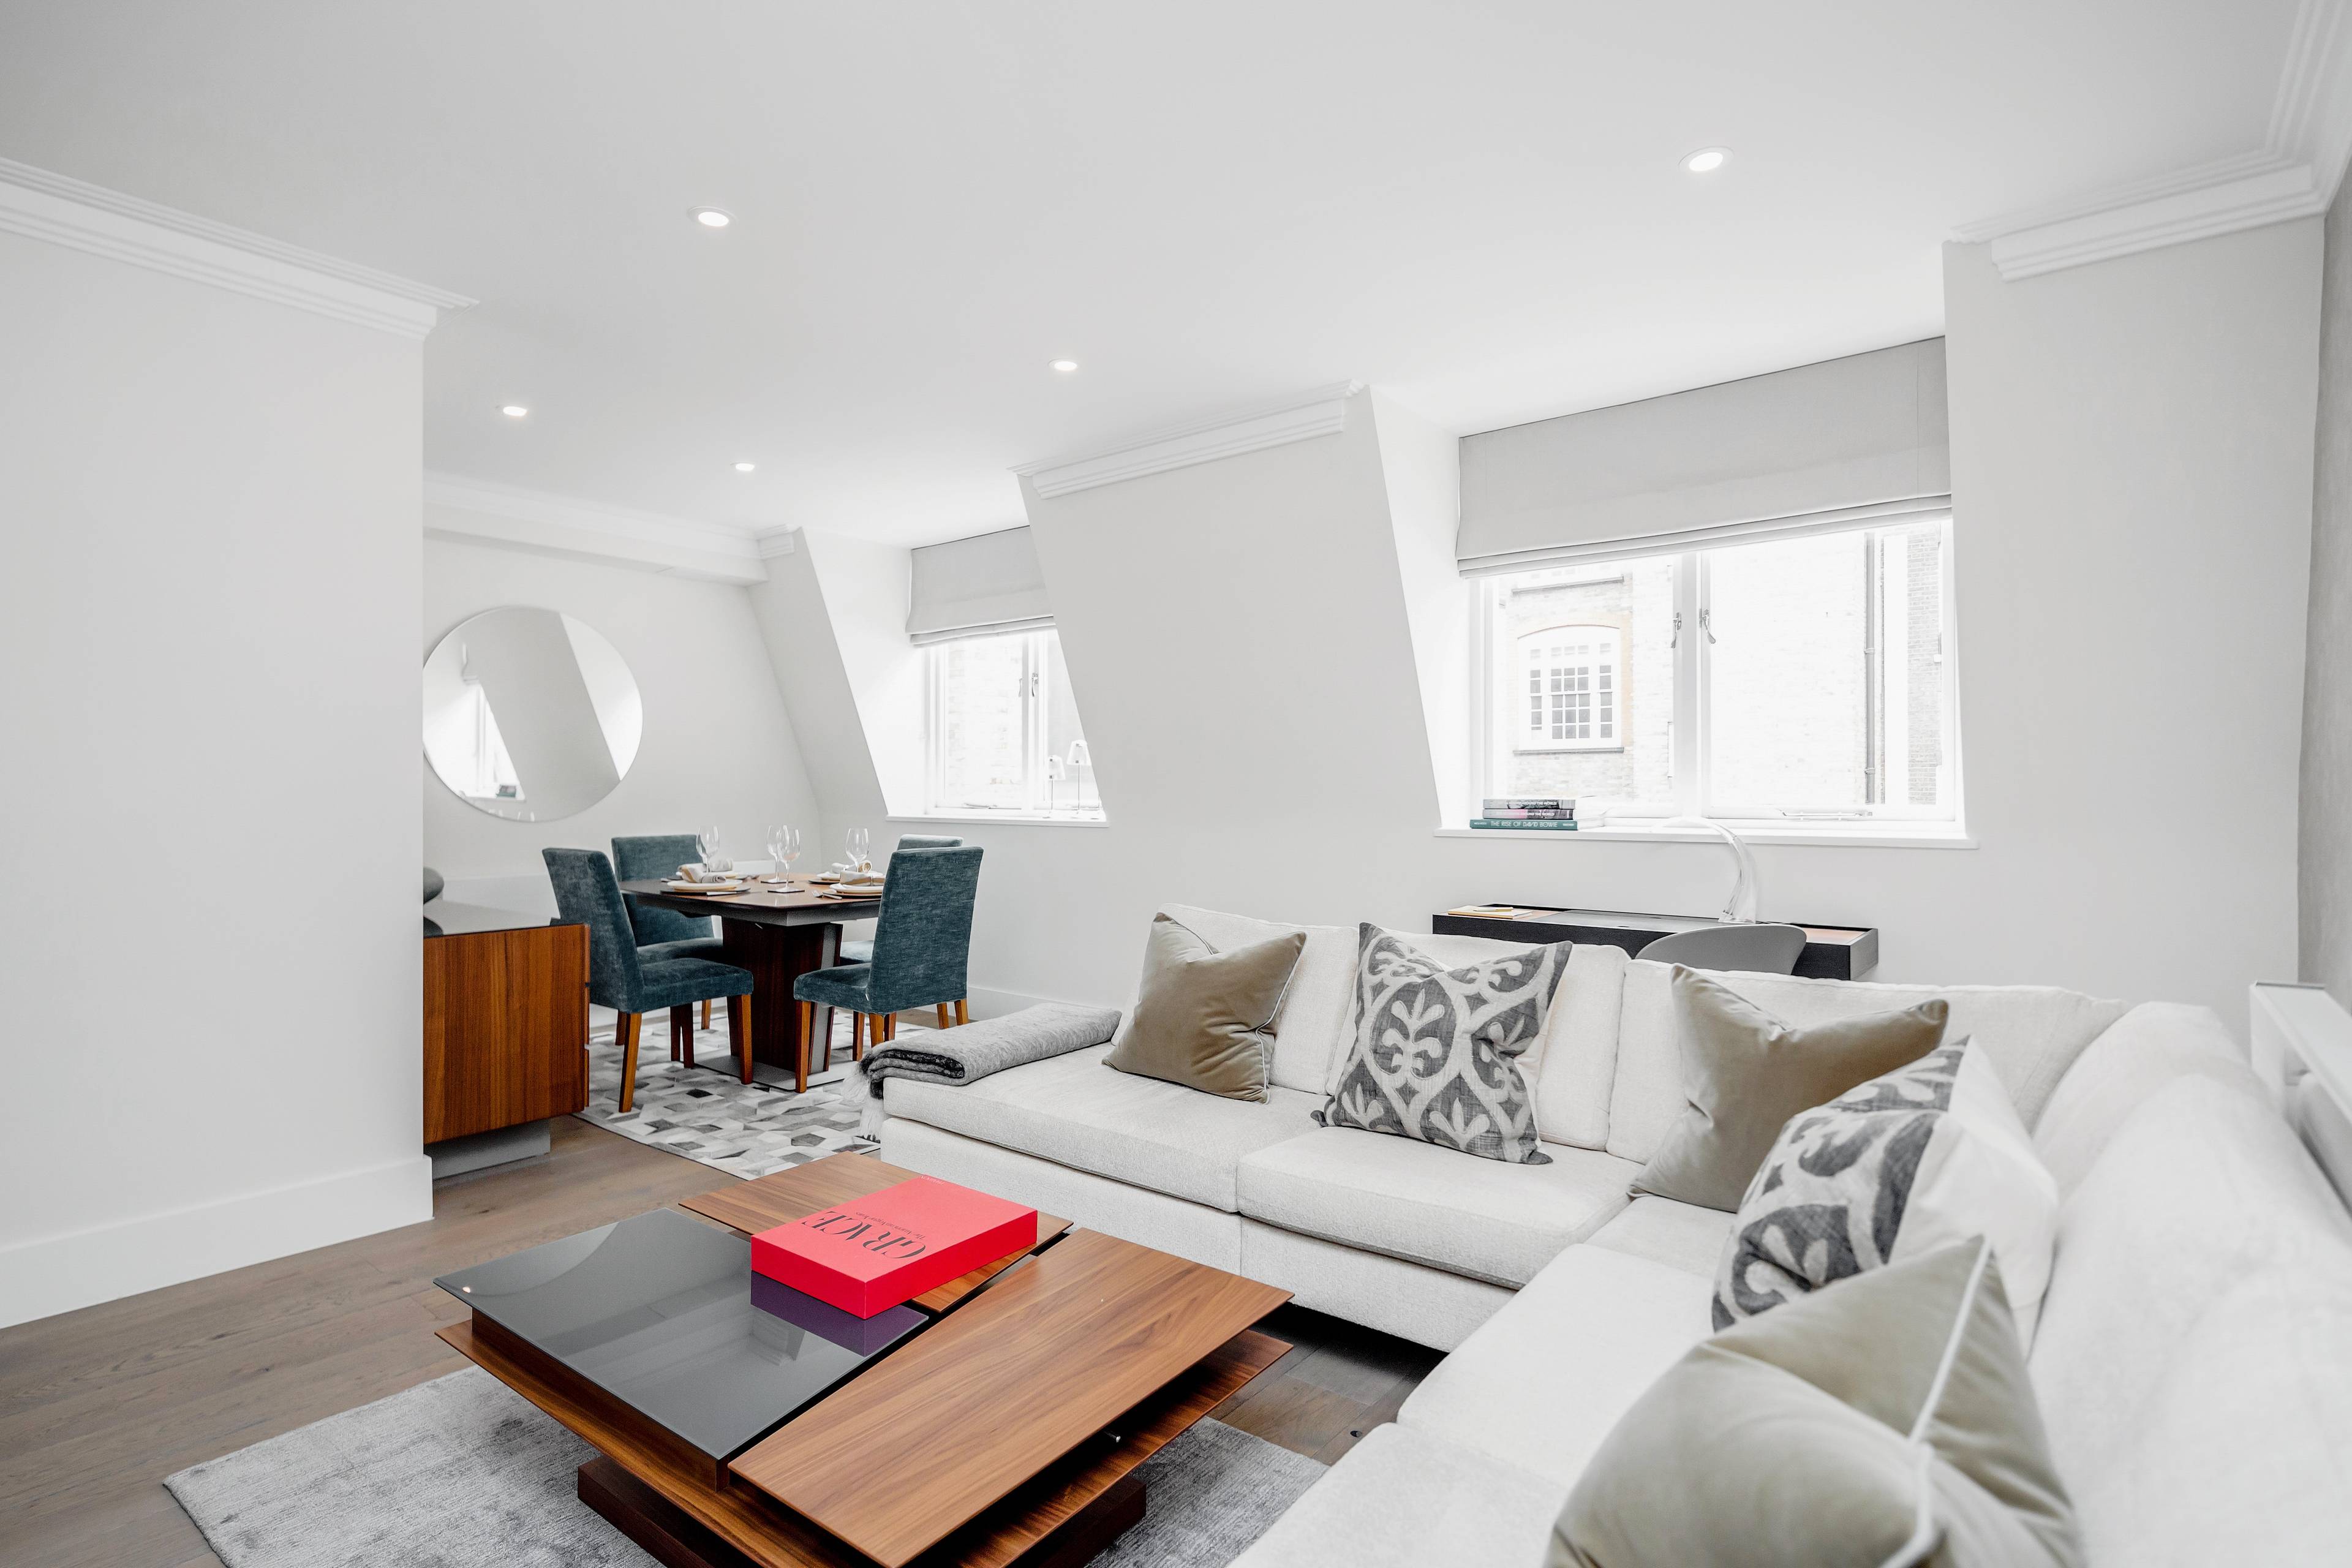 Newly refurbished one-bedroom apartment in the heart of Mayfair. Featuring hardwood floors and modern furnishings, the property includes a large bedroom with built-in storage, en suite bathroom, large reception room, separate kitchen, guest WC and lift.